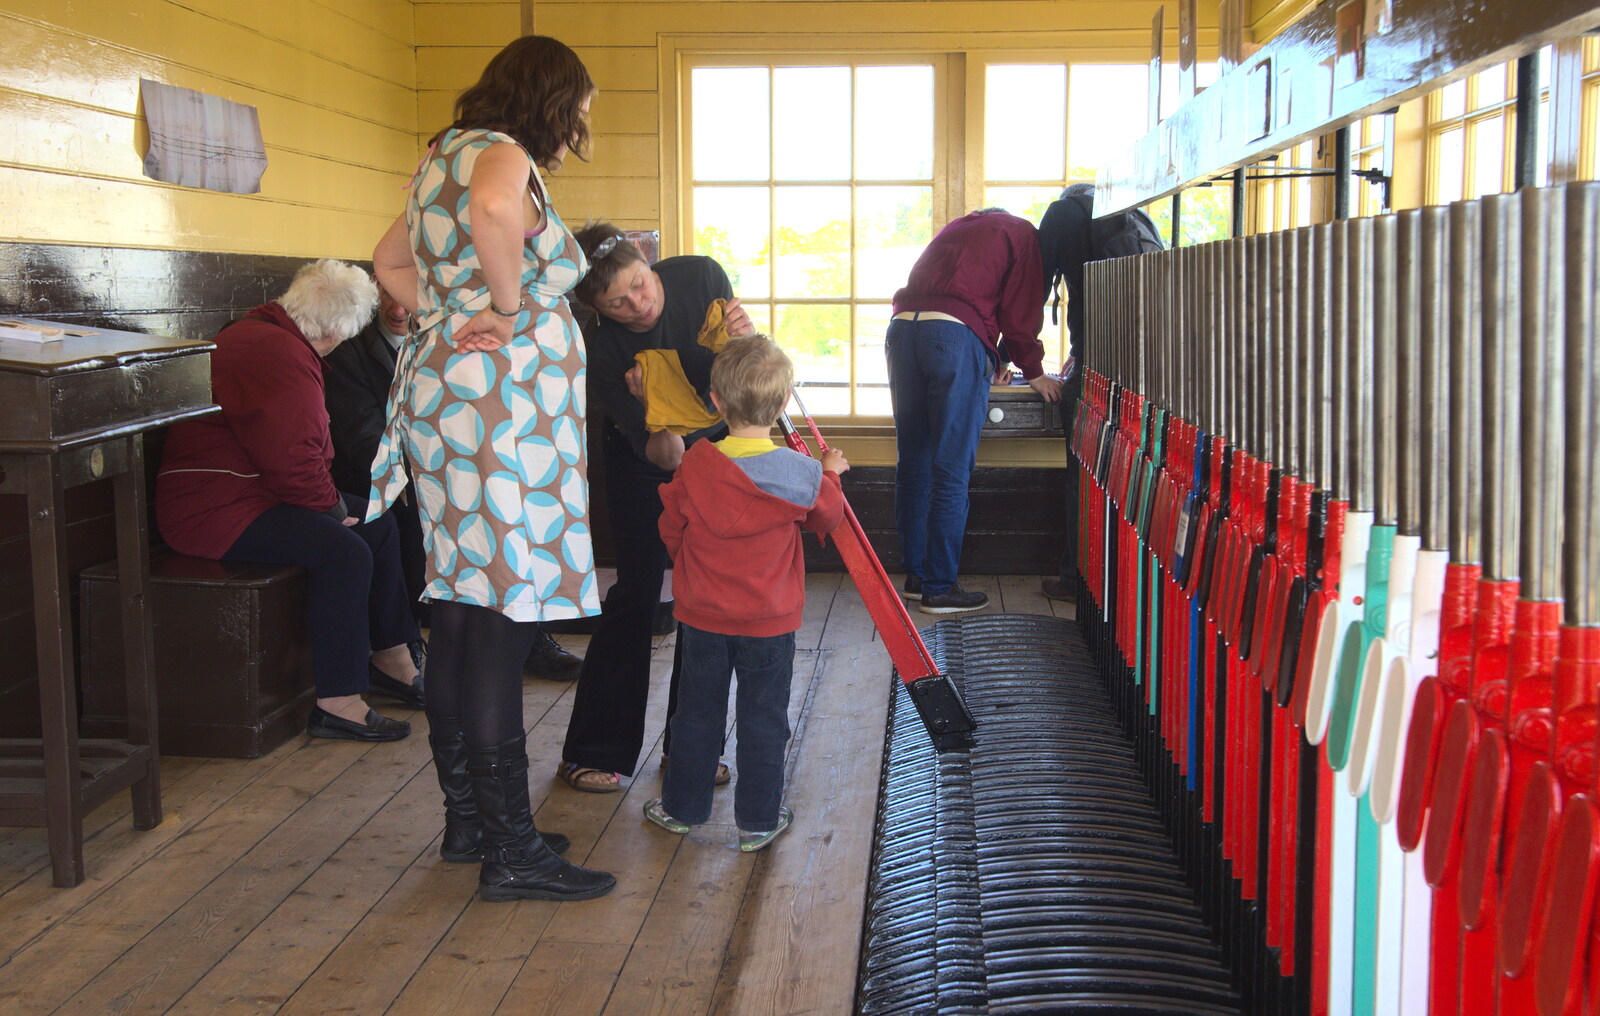 Fred has a go from The Bure Valley Railway, Aylsham, Norfolk - 26th May 2013